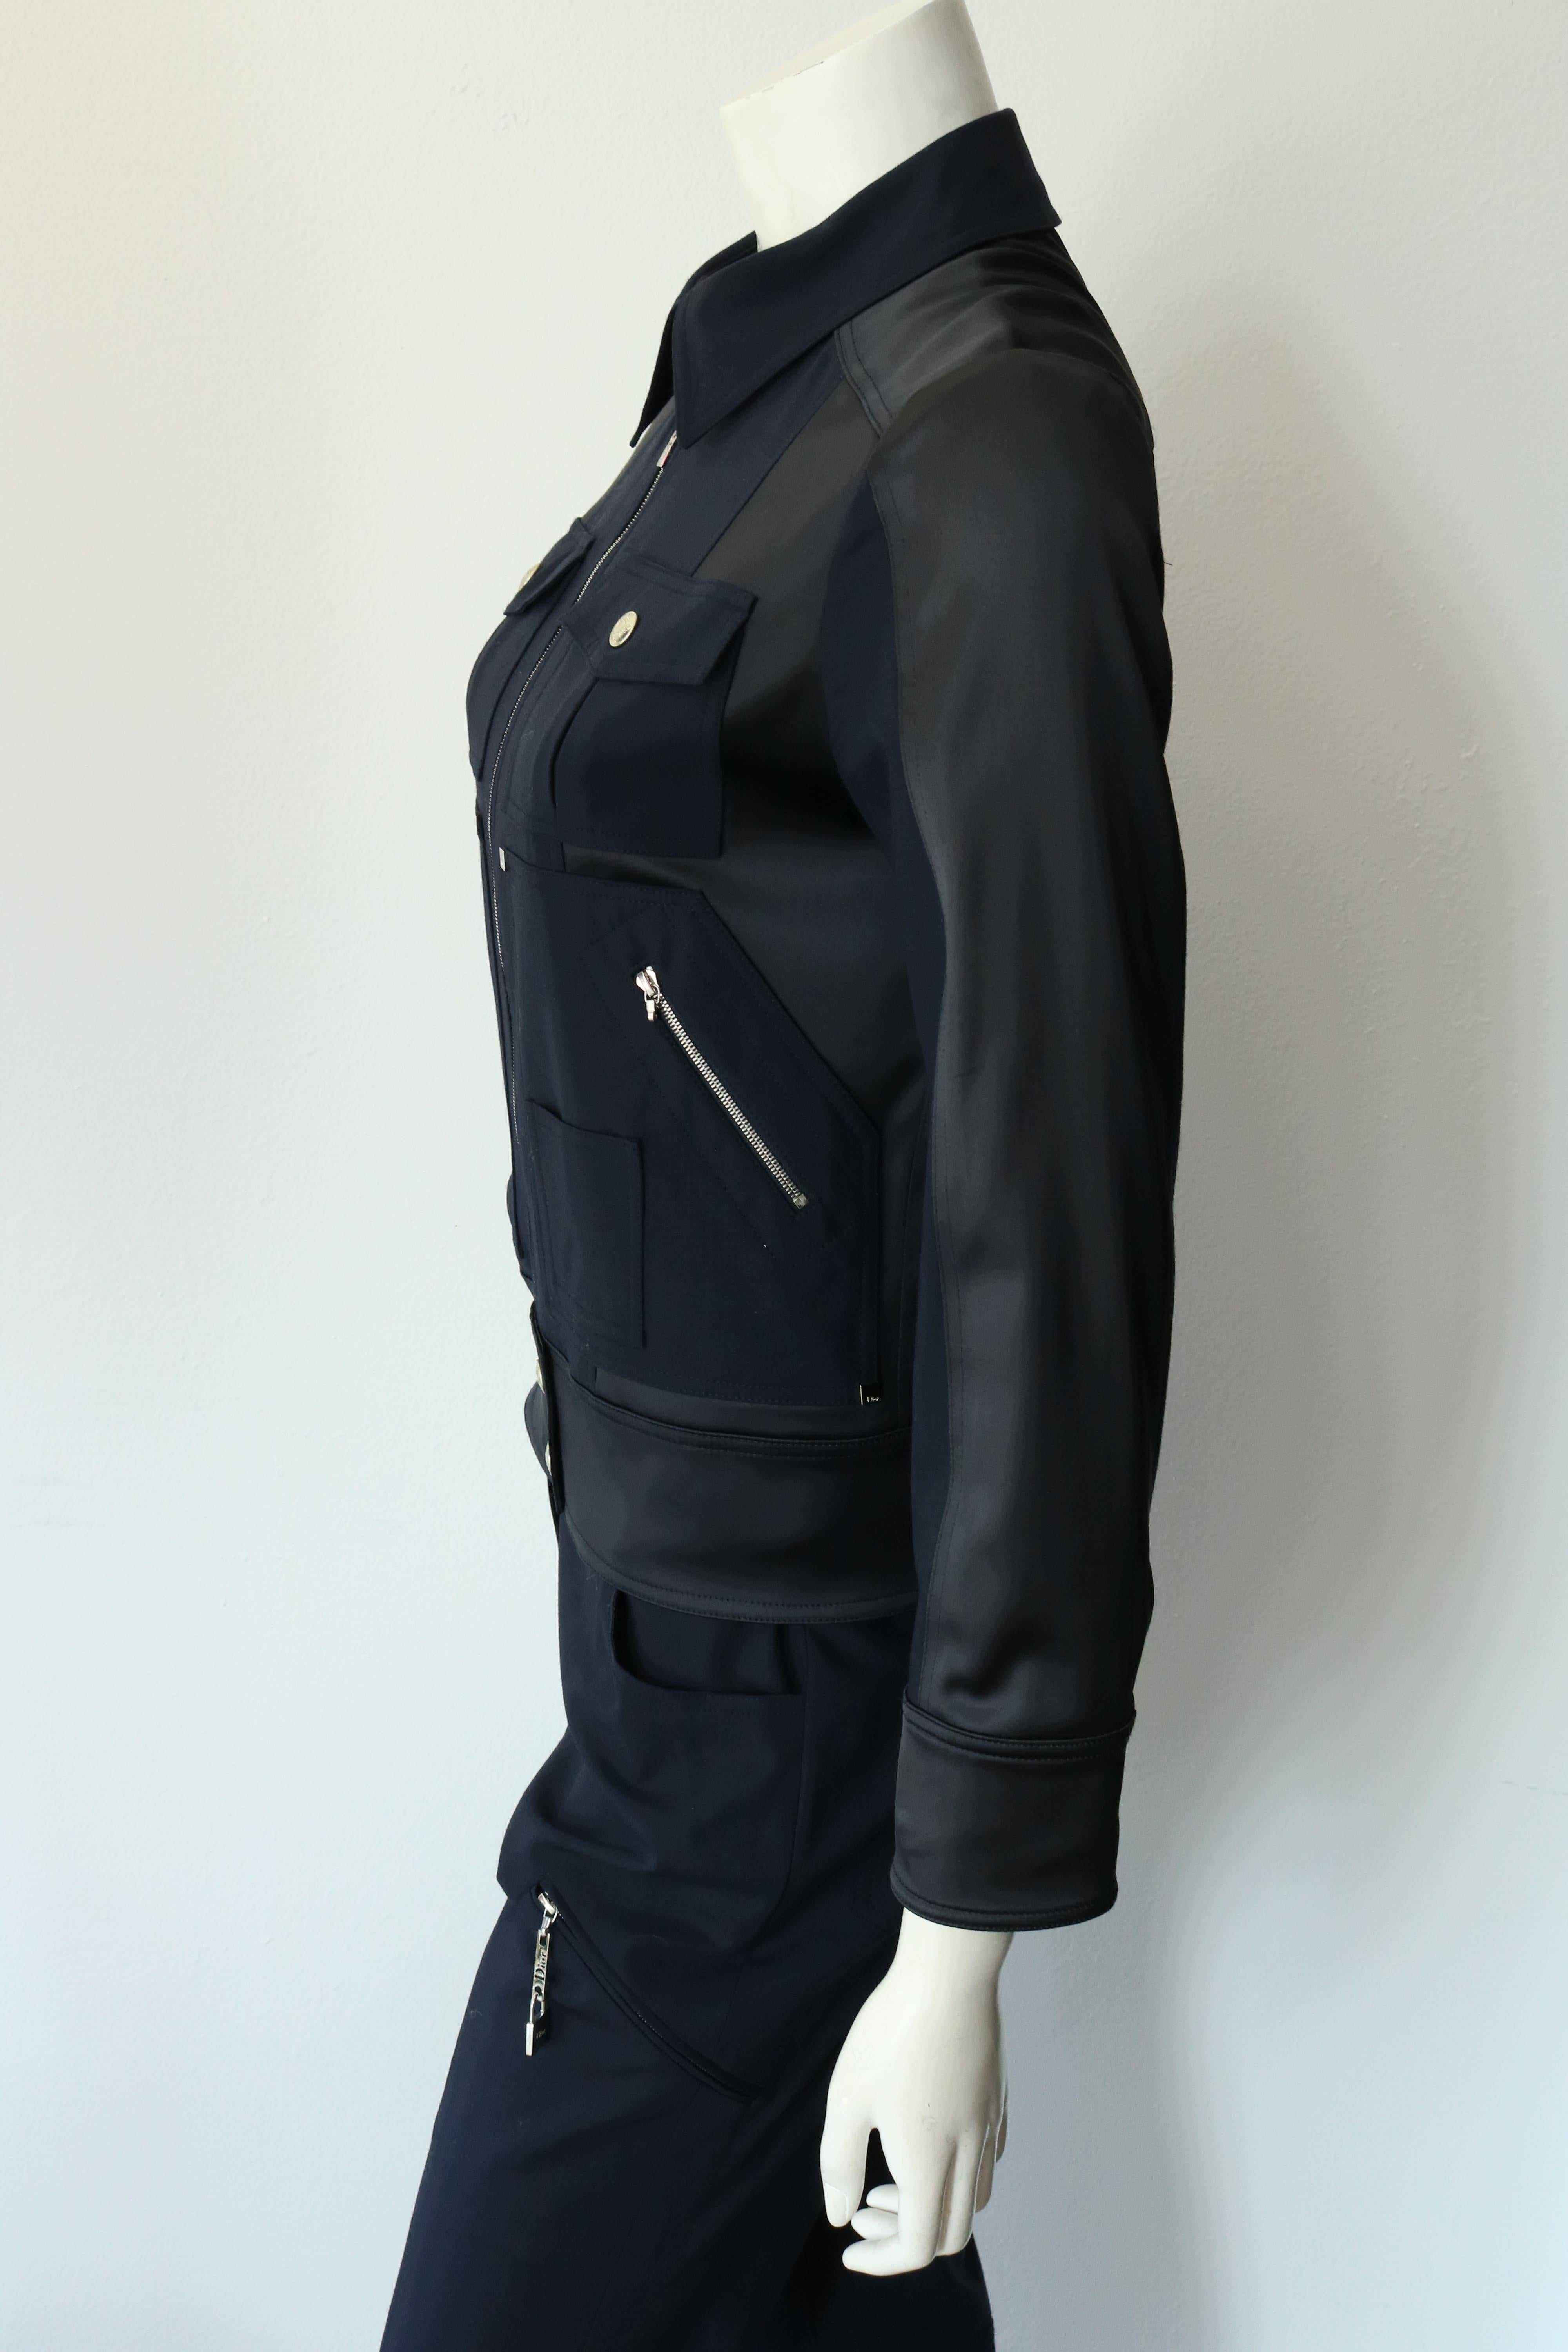 Christian Dior Navy Blue Jacket and Trouser Ensemble Size US 6  In Excellent Condition For Sale In Thousand Oaks, CA